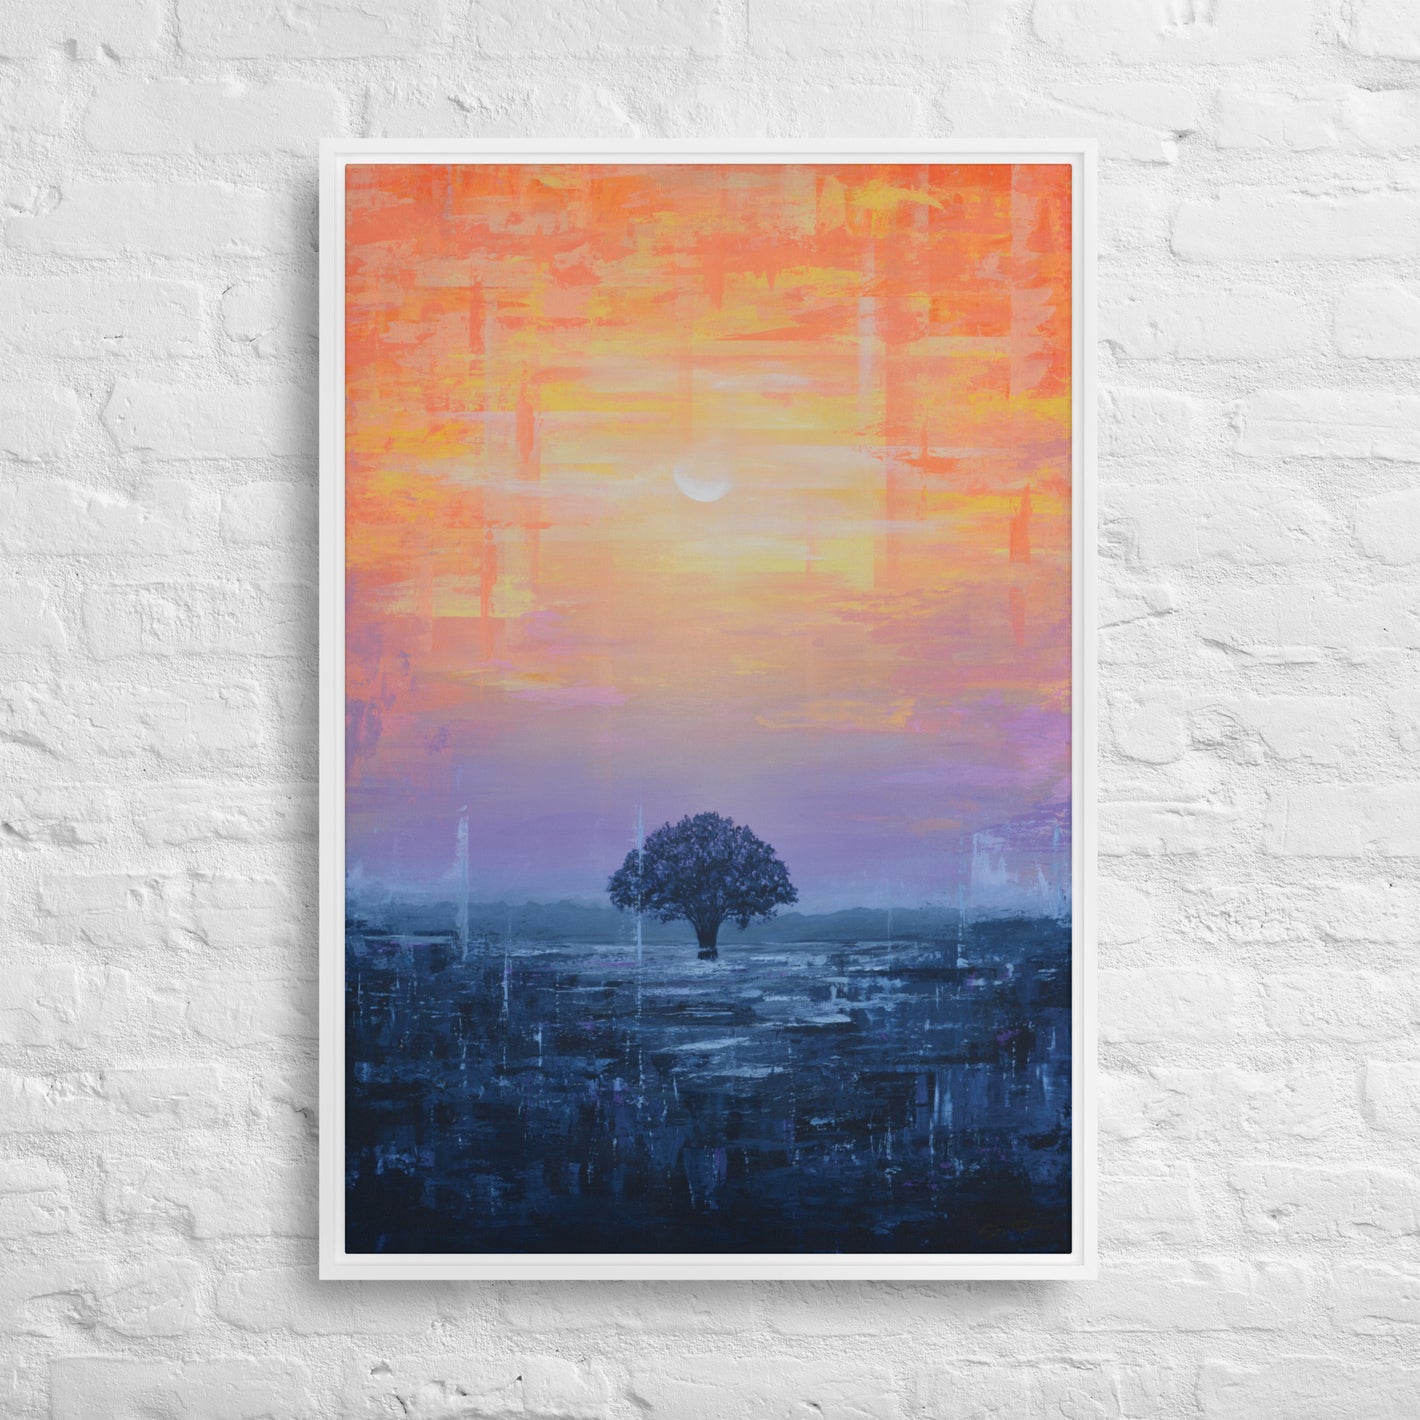 Plainfield Sunset Painting by Shawn Dixon framed canvas print